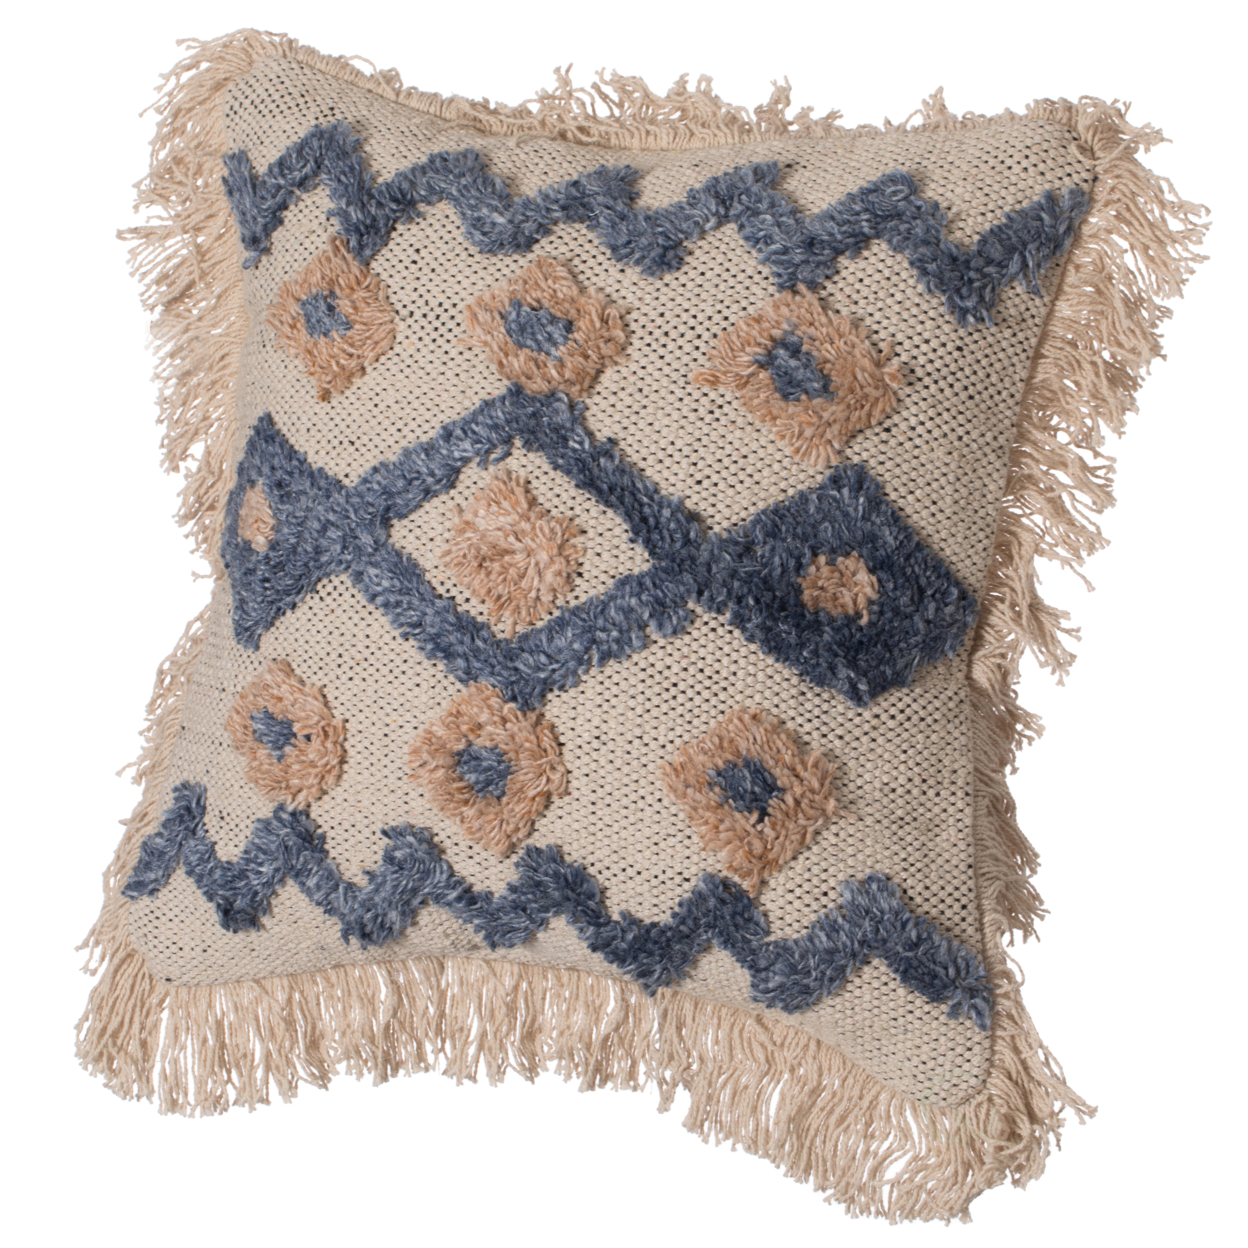 16 Handwoven Cotton & Silk Throw Fringed Pillow Cover Embossed Zig Zag & Crossed Lines Design - Zig Zag With Cushion